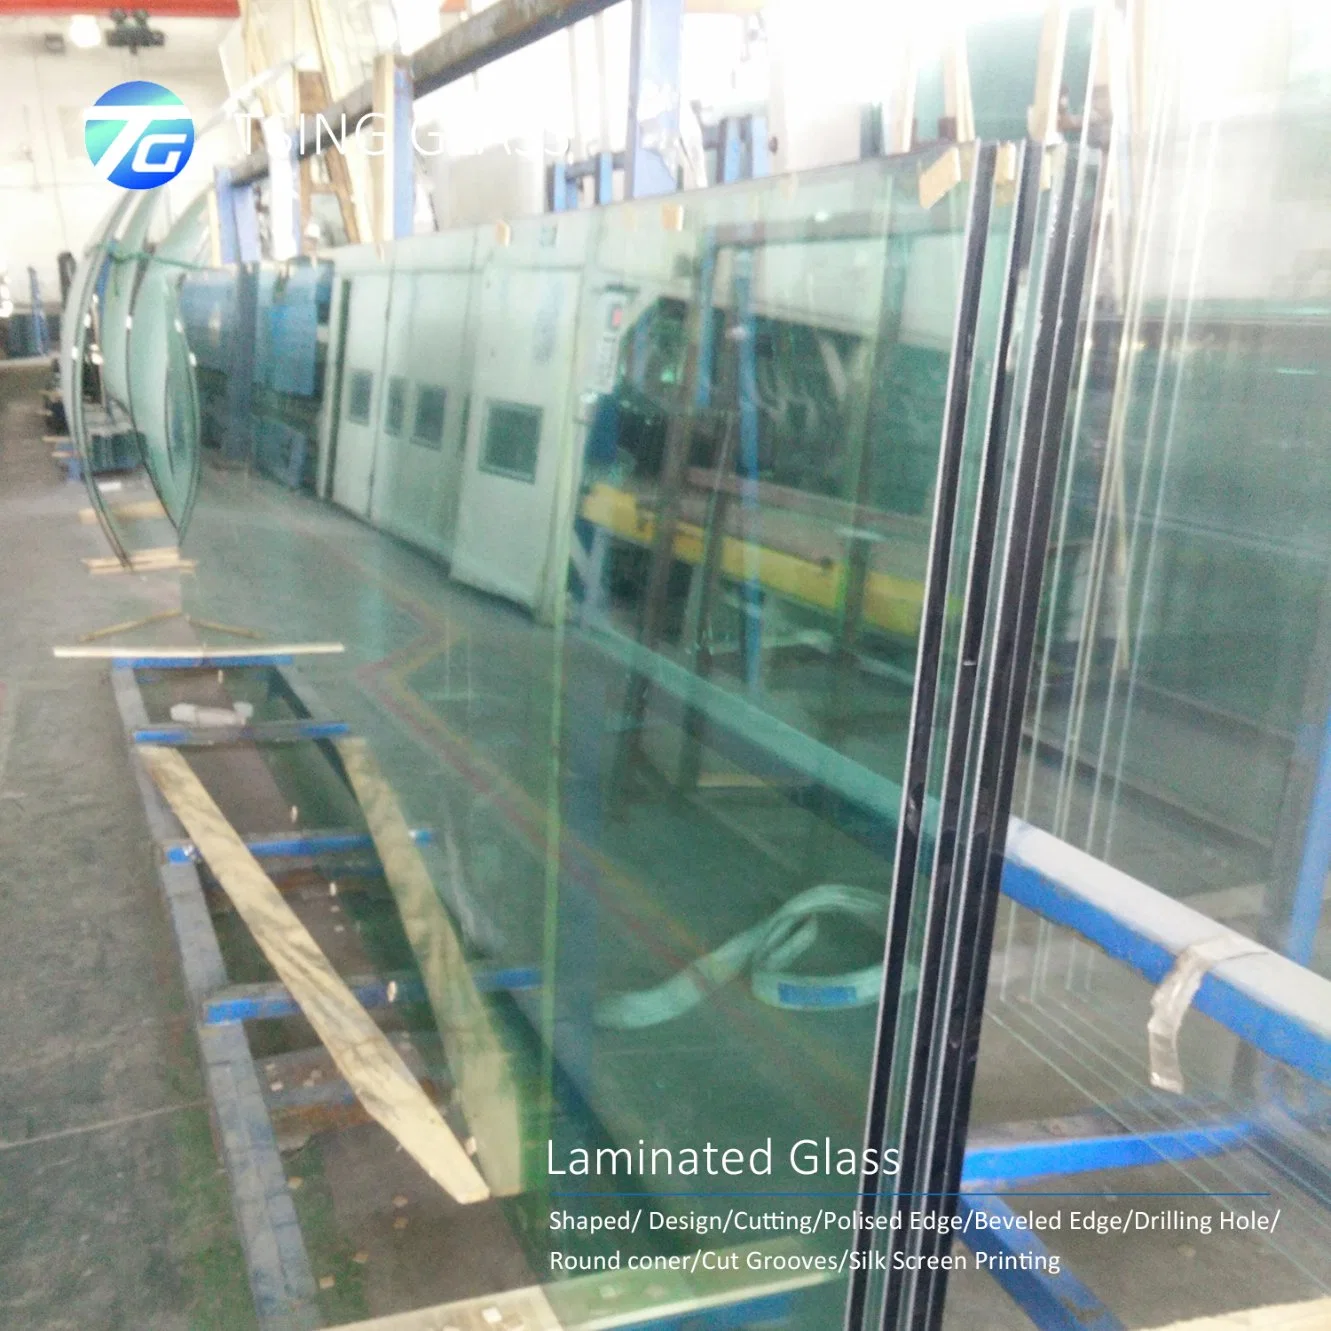 High quality/High cost performance Clear/Tinted/Flat/Bent/Shaped Safety Glass/Laminated Glass/Toughened/Tempered Glass for Stairs/Balustrade/Building/Shower